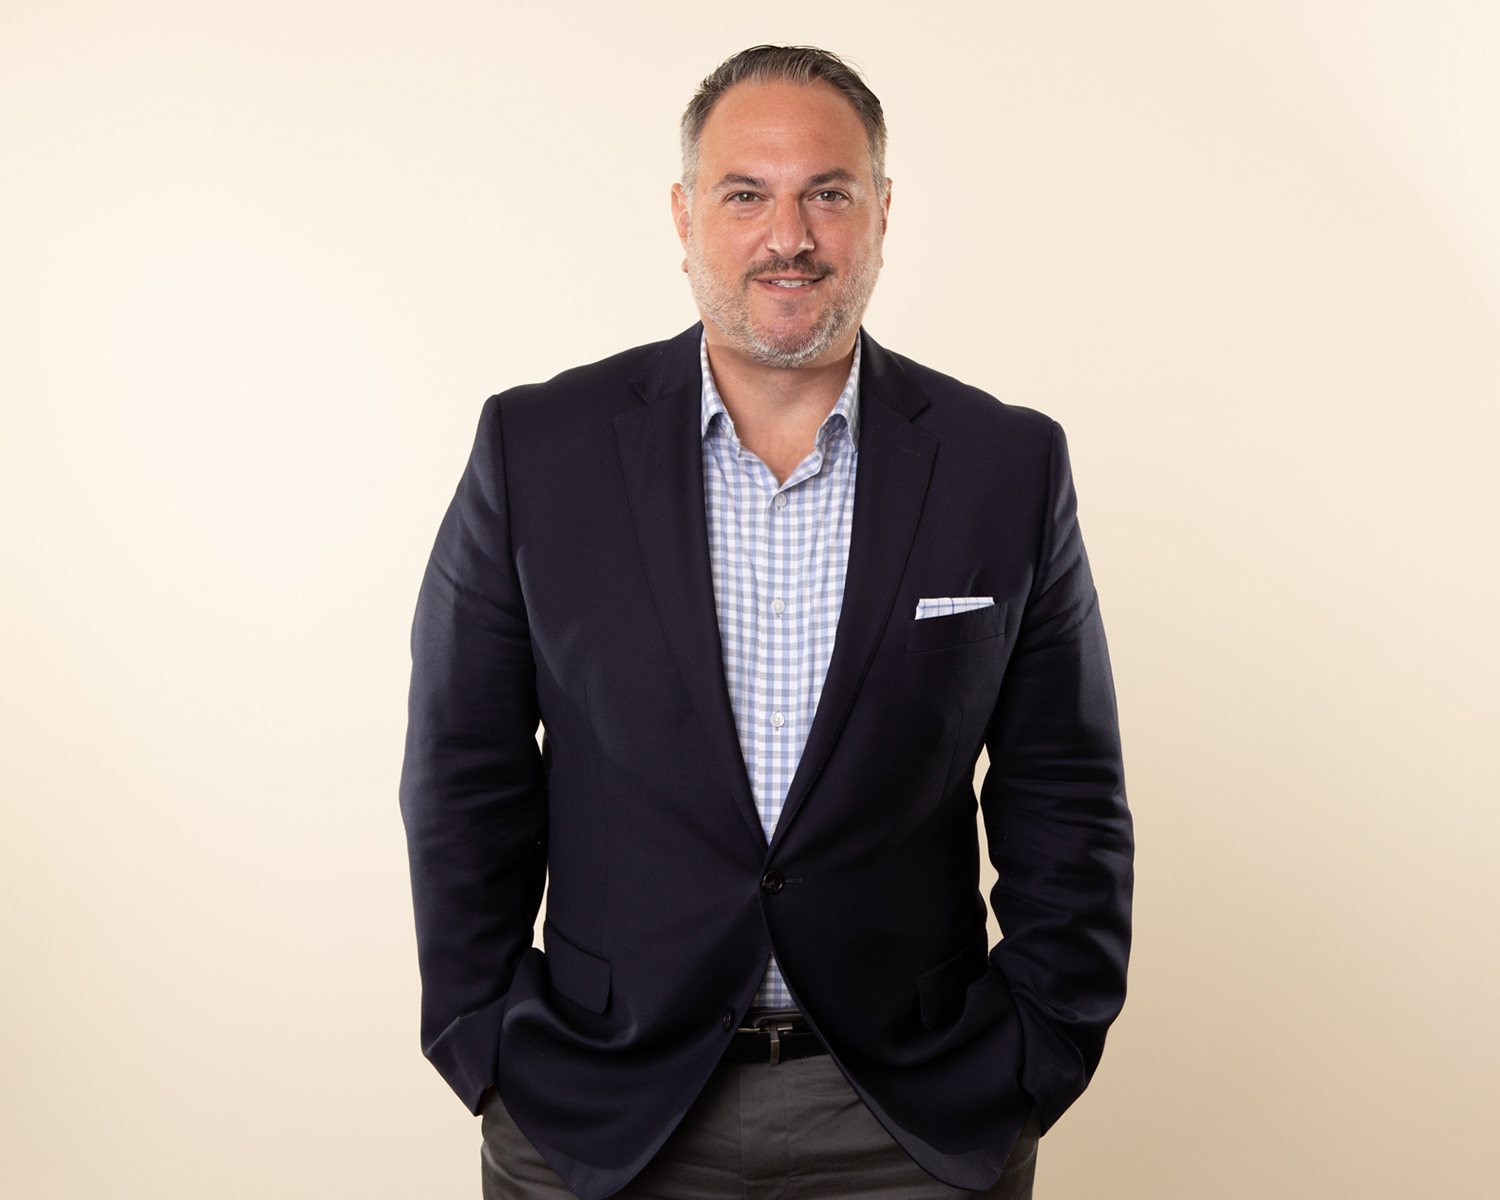 Paul Orlando has been promoted to Managing Director of Sales for Jencap Group.